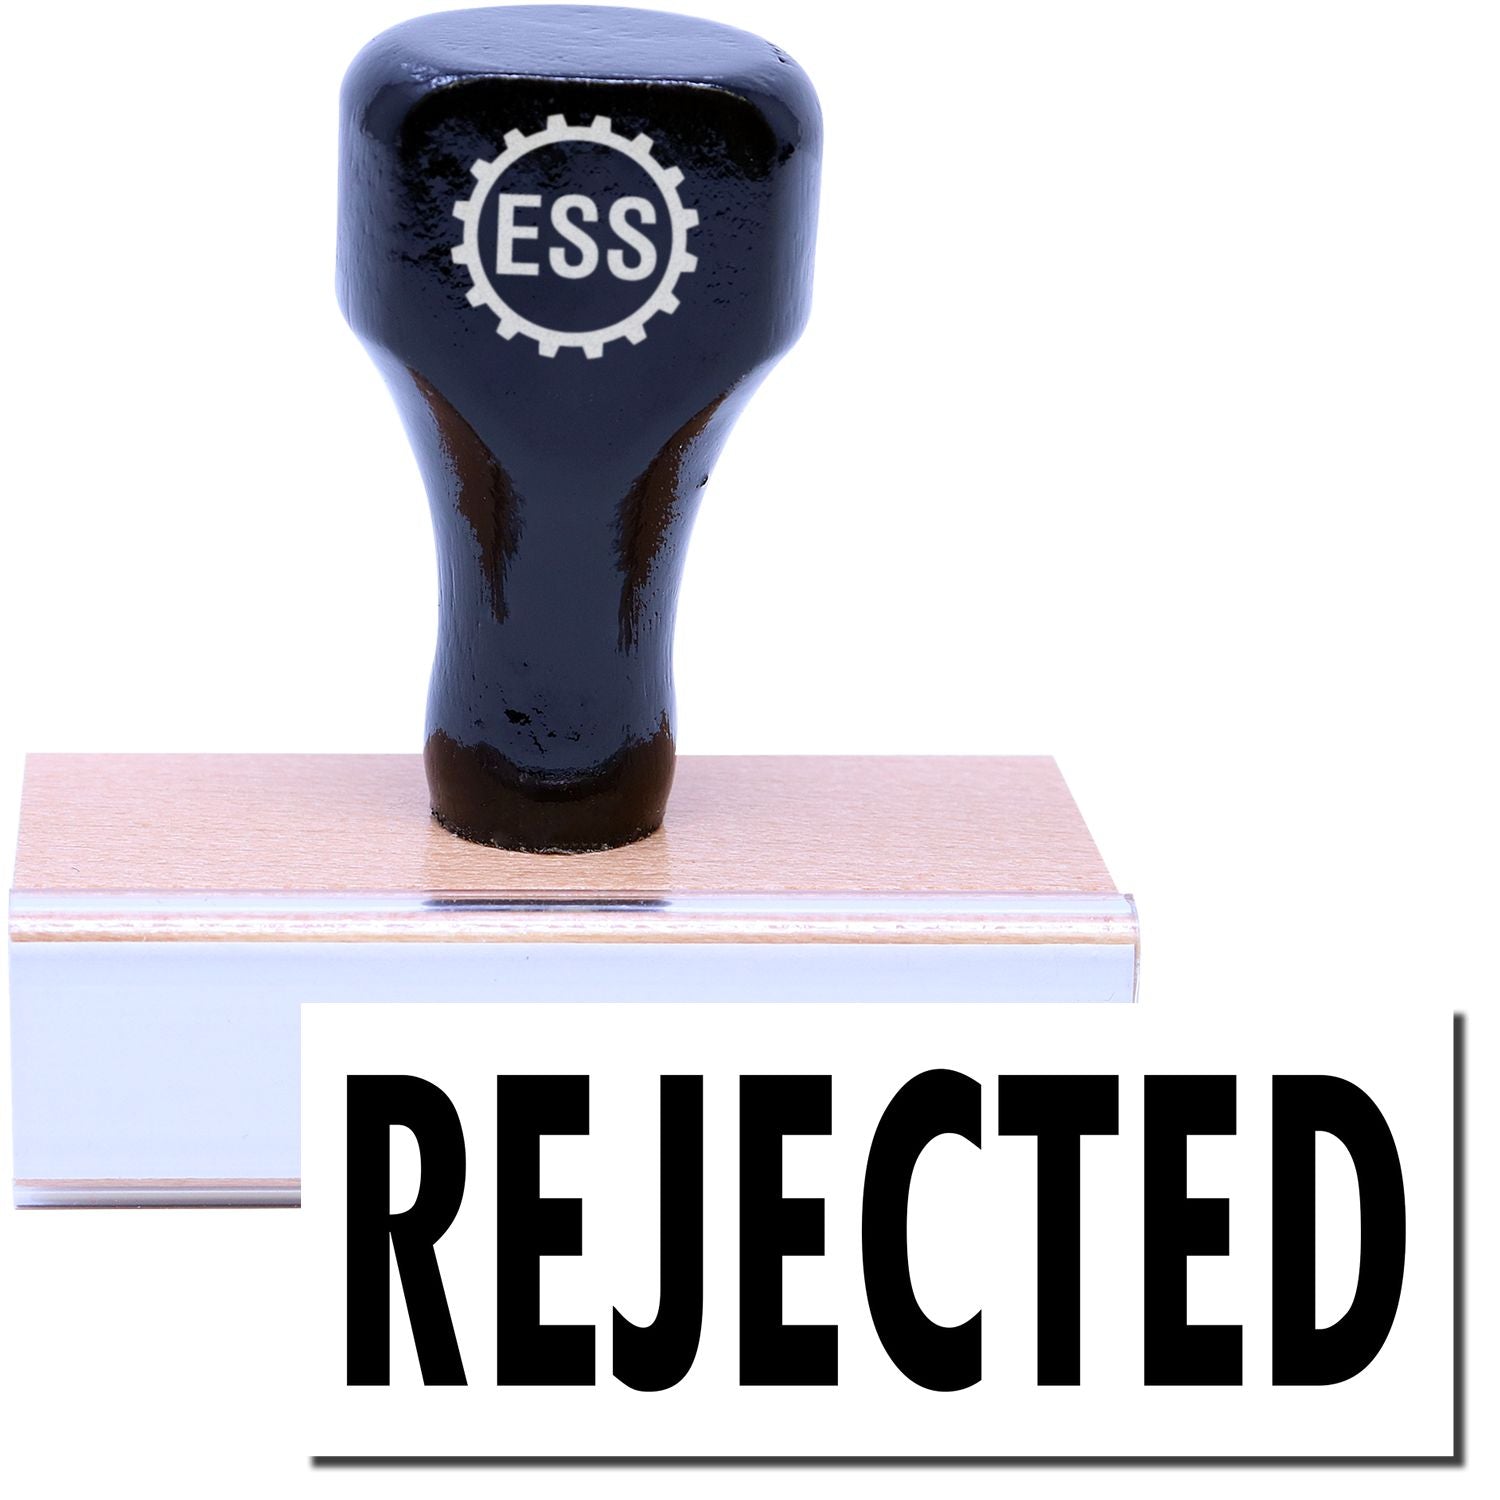 A stock office rubber stamp with a stamped image showing how the text "REJECTED" in a large font is displayed after stamping.